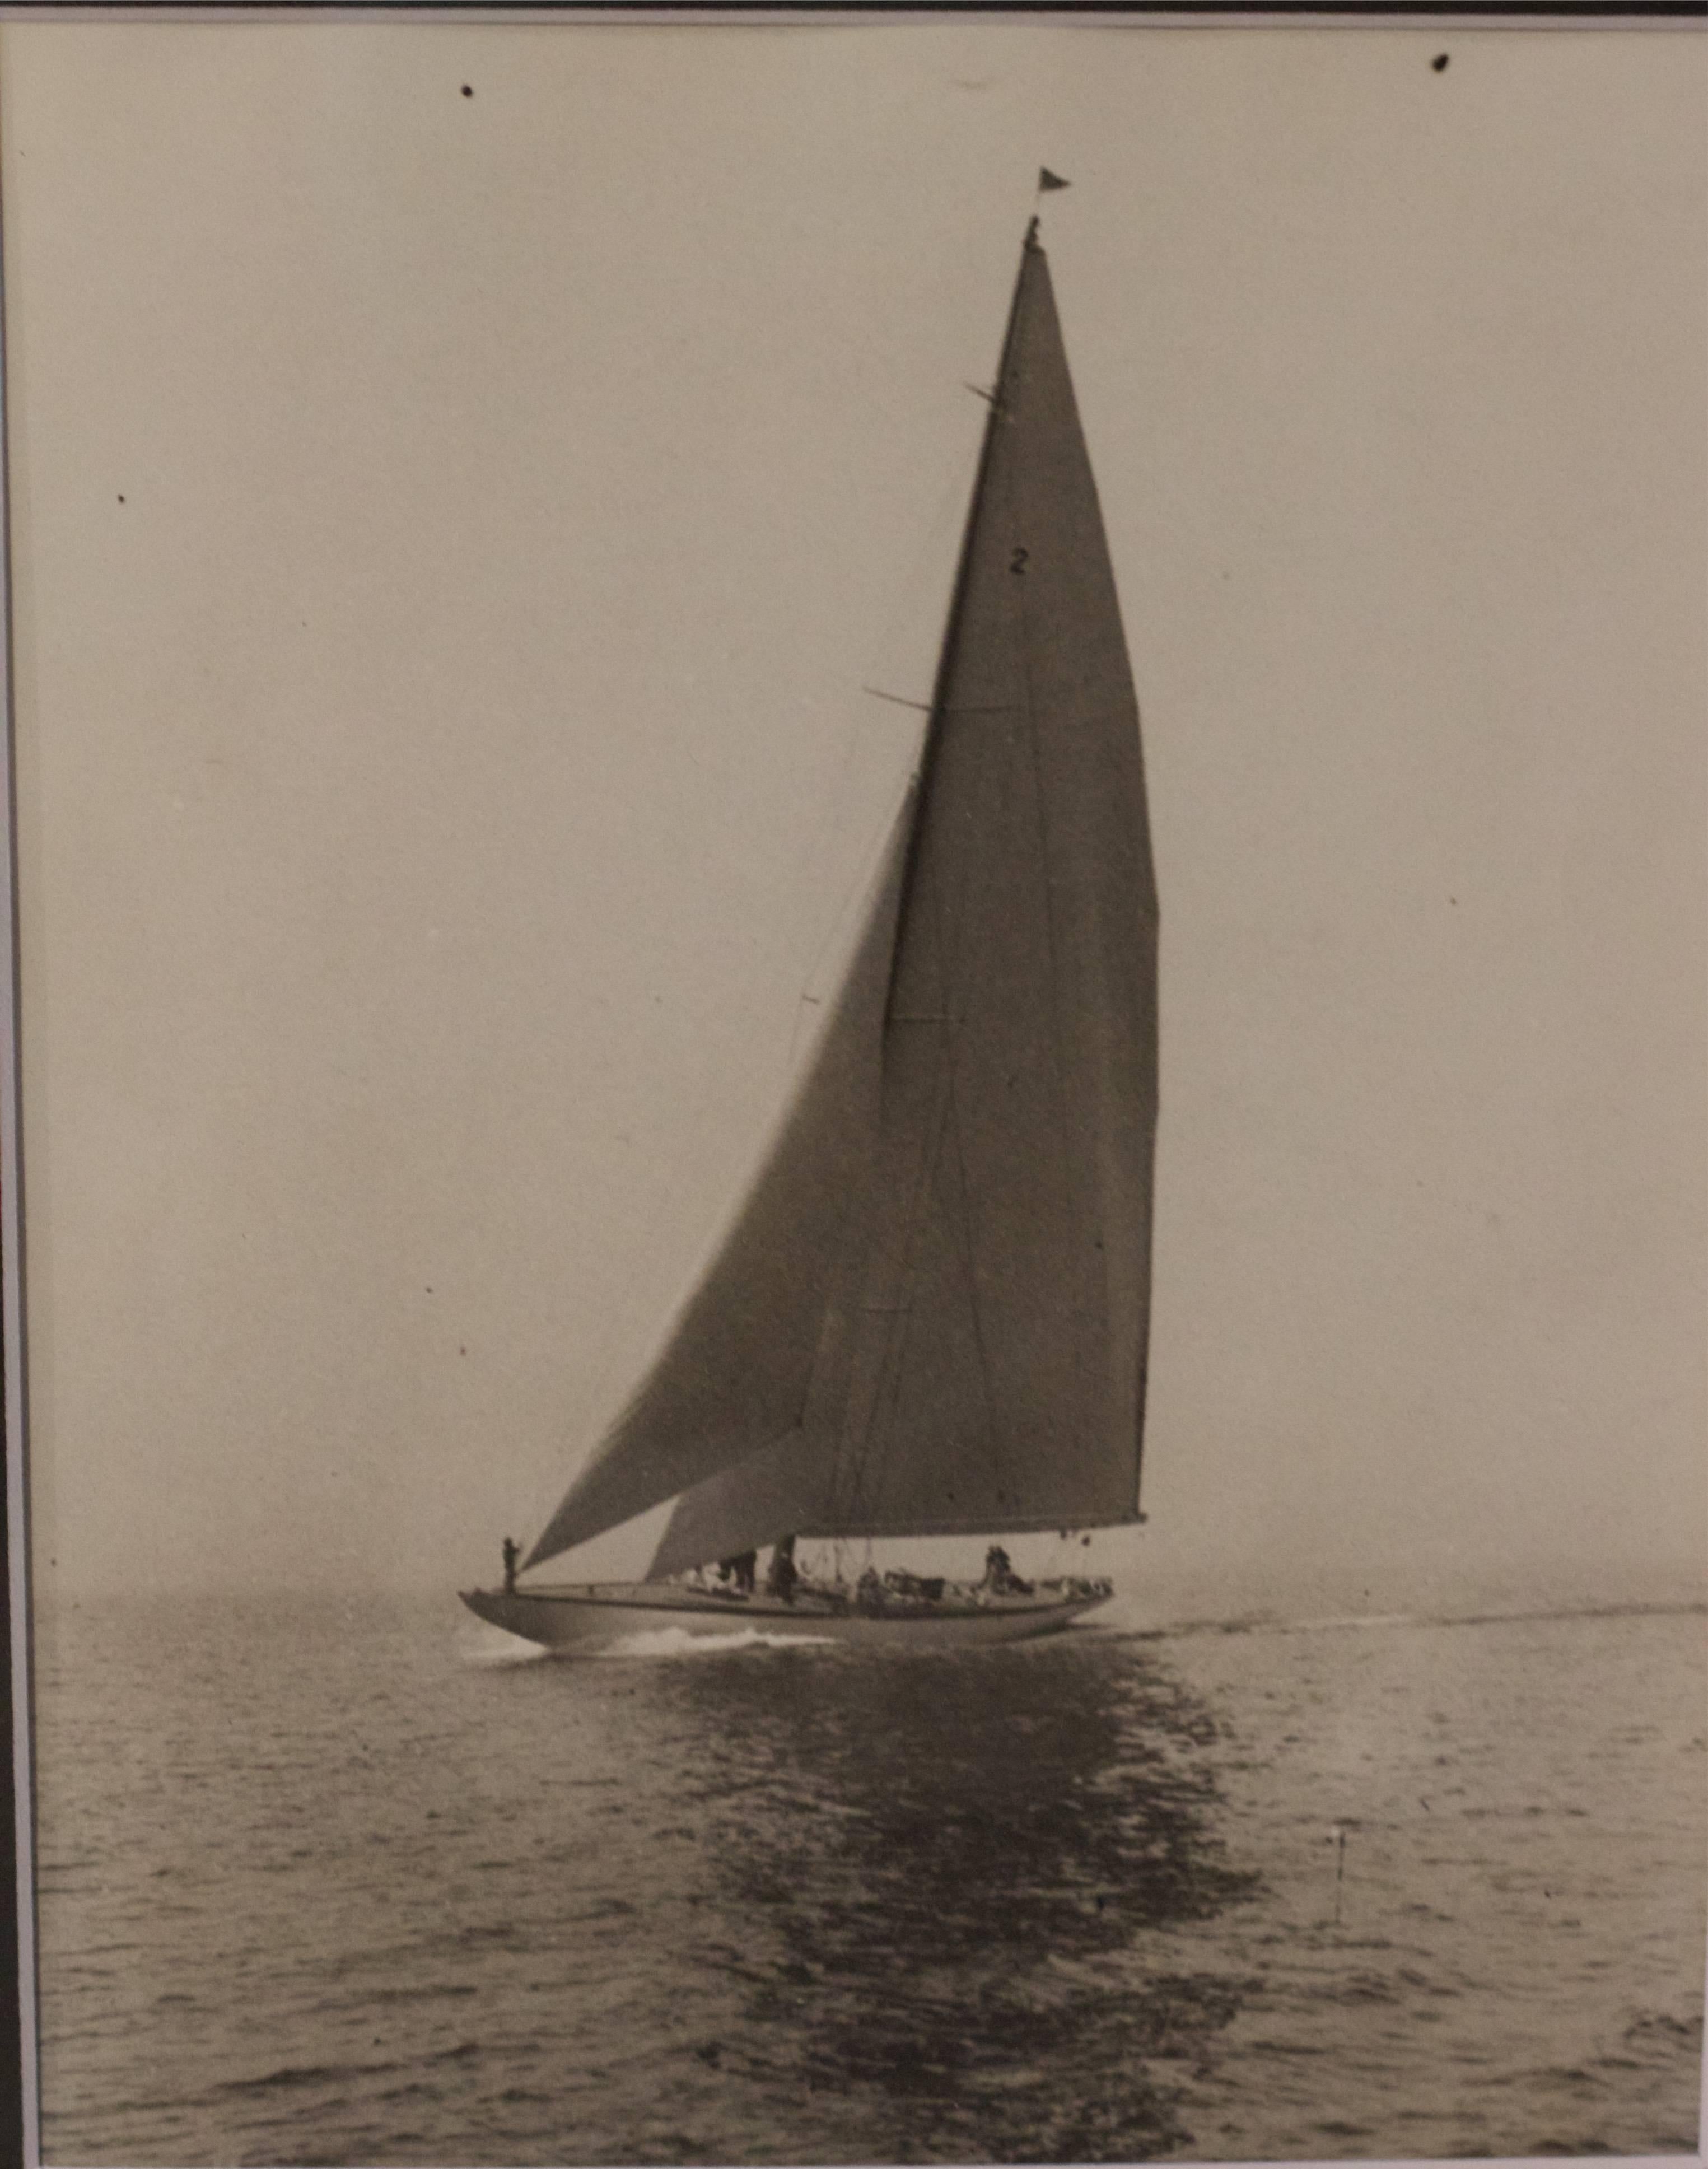 Original press photo showing the America's Cup J-Boat "Yankee", circa 1930. Matted and framed in silver. Dimensions: 14.5" H x 12.5" L.